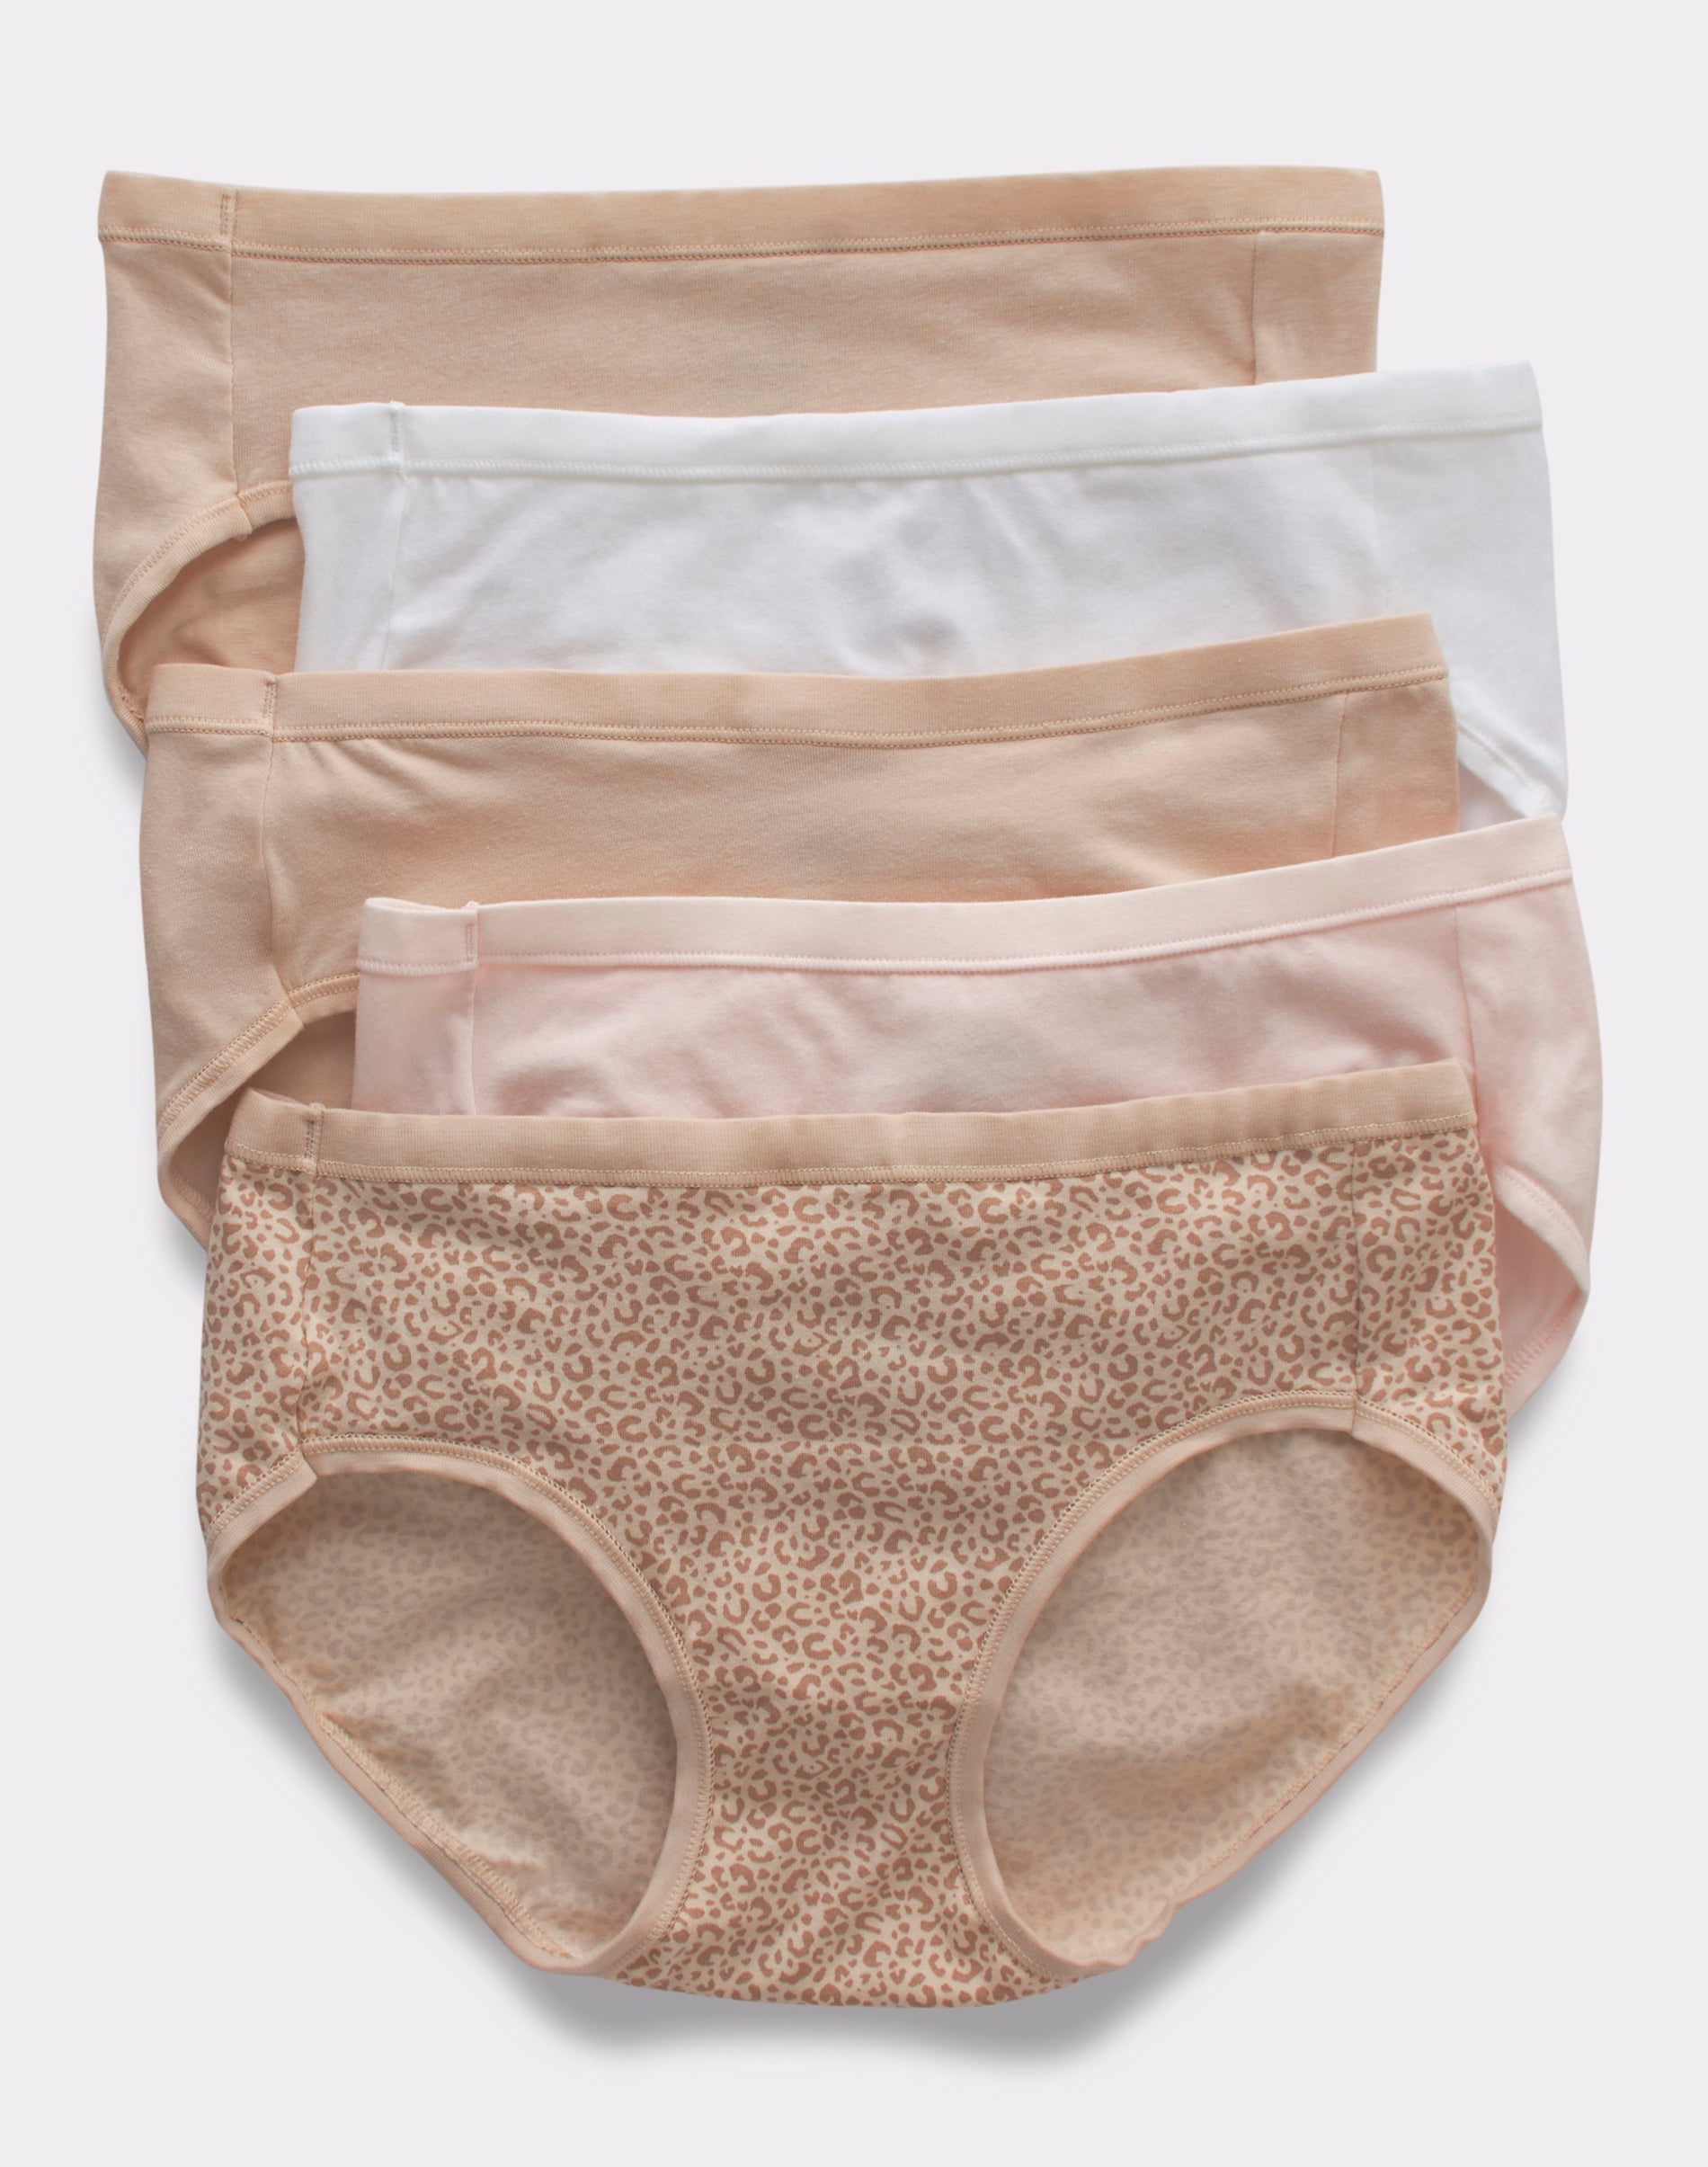 Hanes Ultimate Comfort Assorted Hipster Period Panty Size 10, 4 pk - Kroger